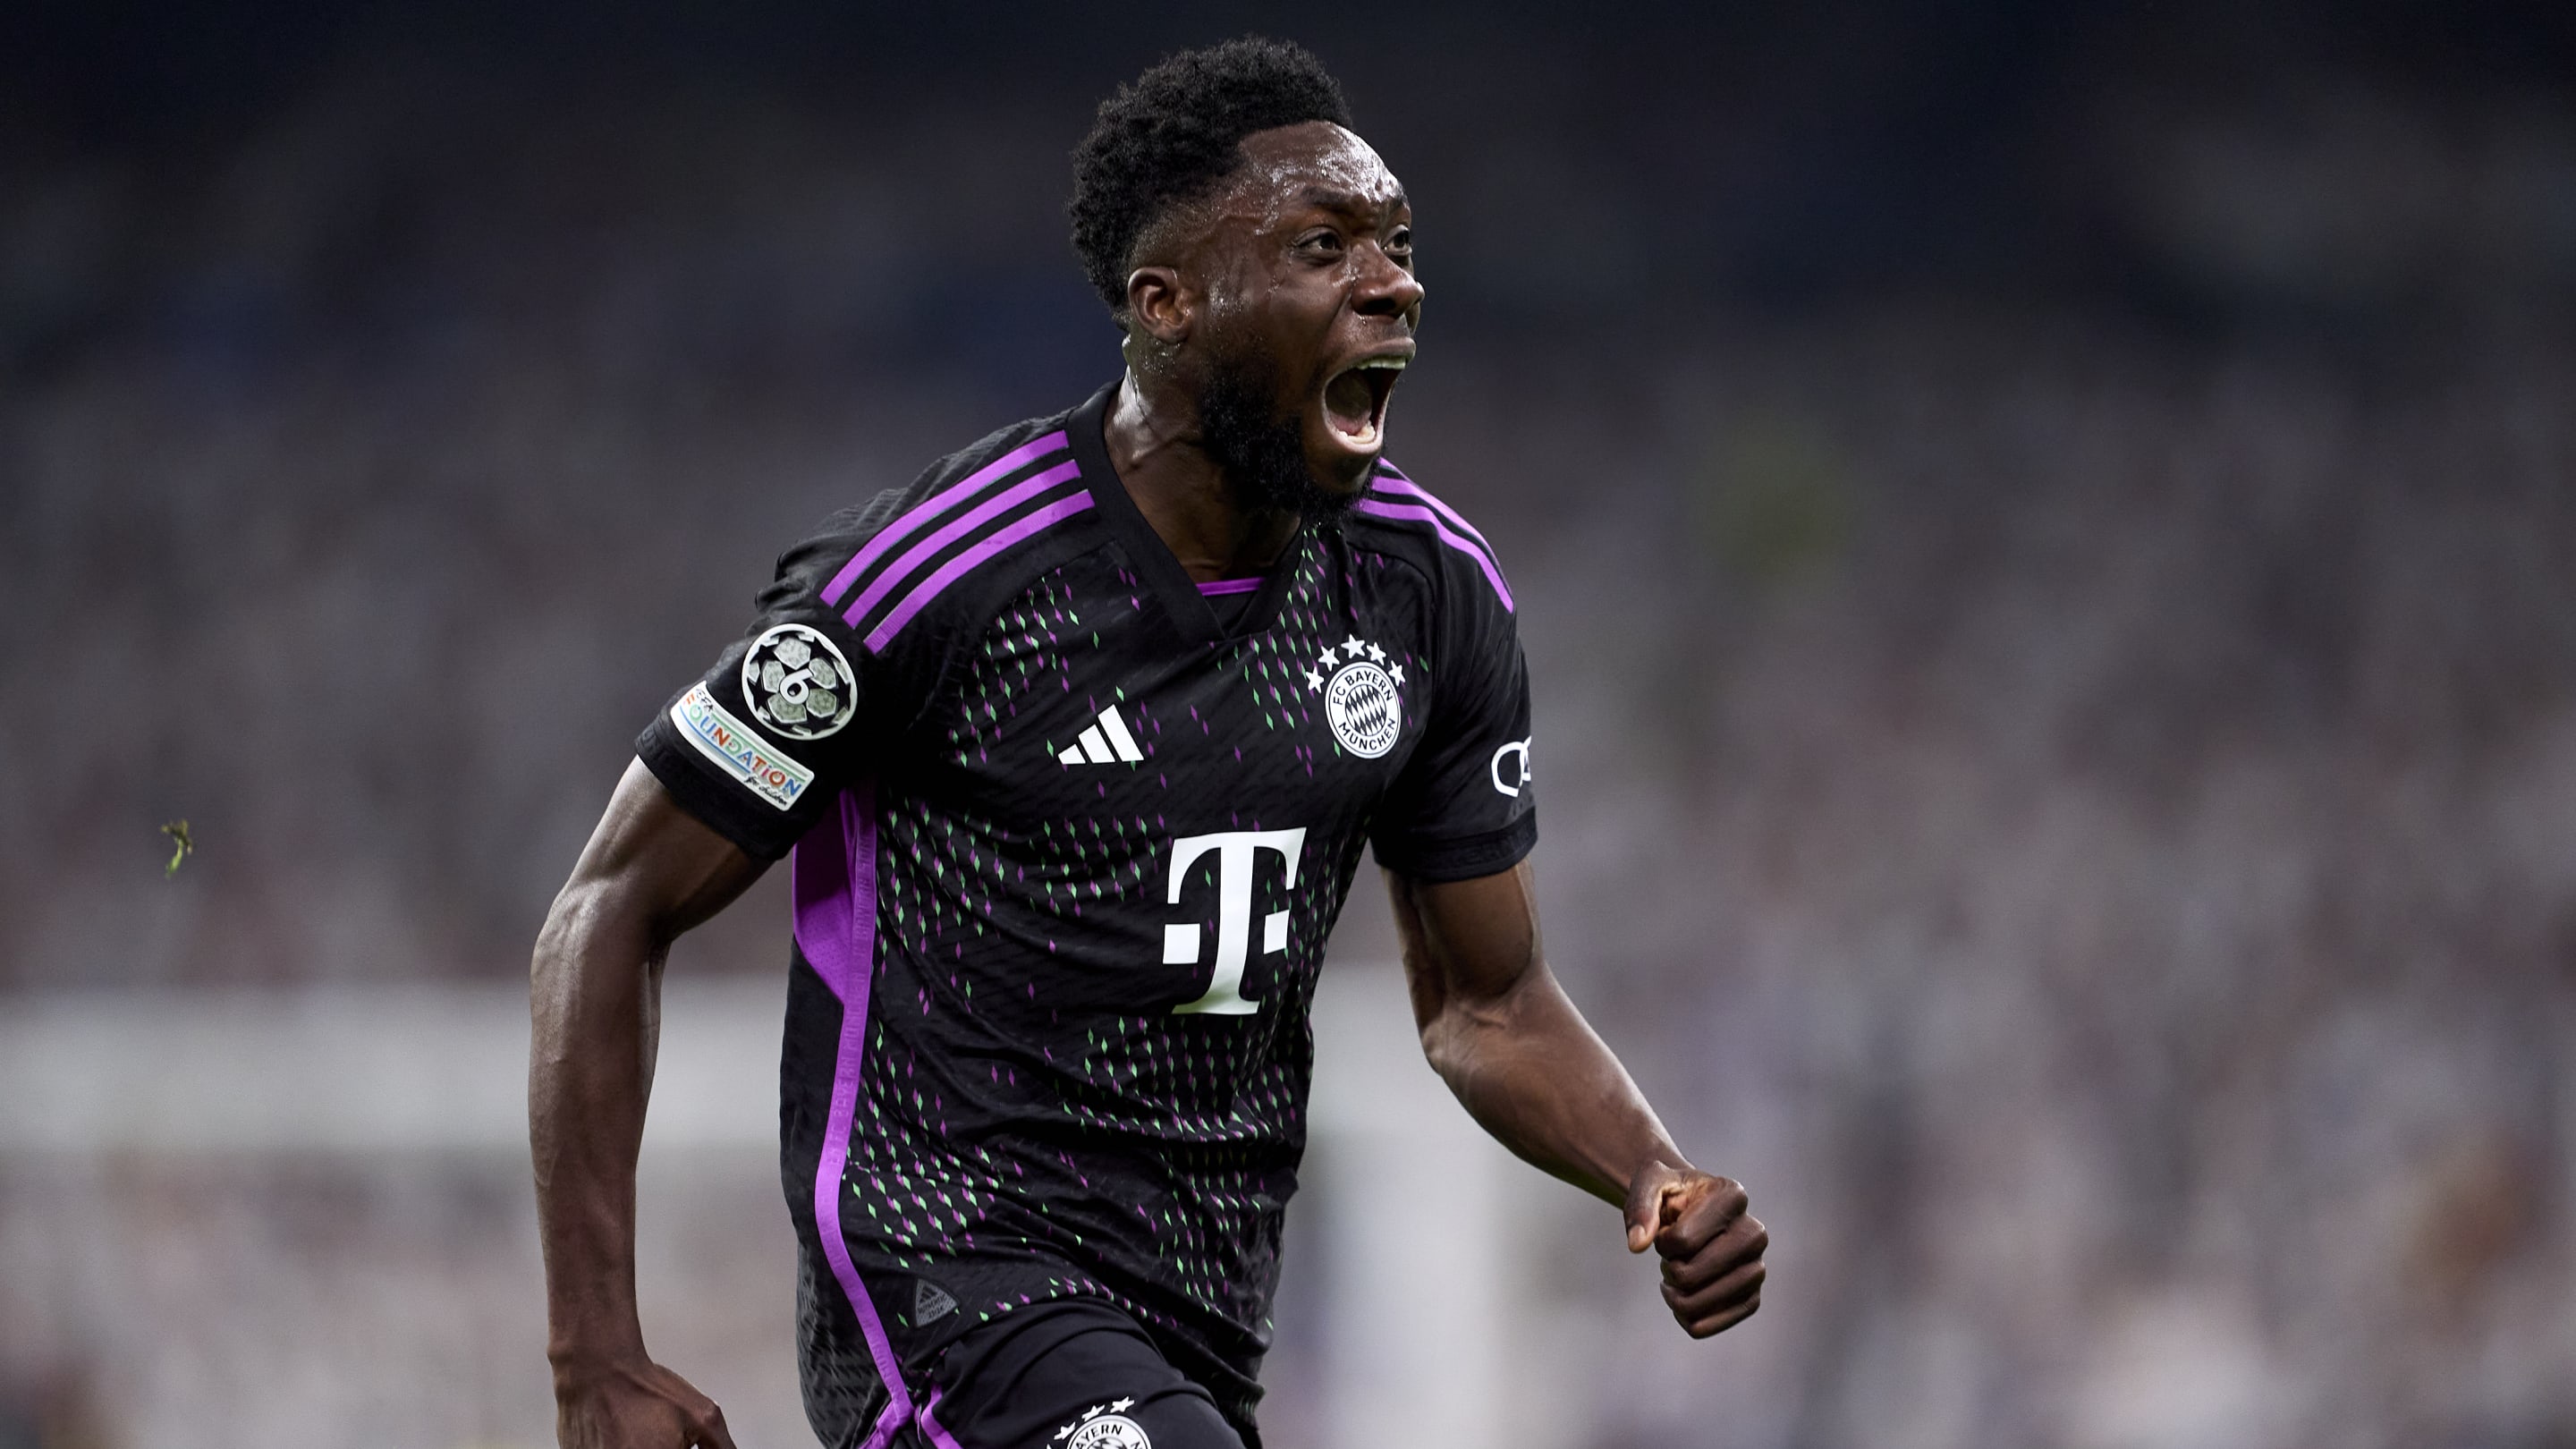 Bayern Munich hold talks with Alphonso Davies replacement amid Real Madrid interest - report